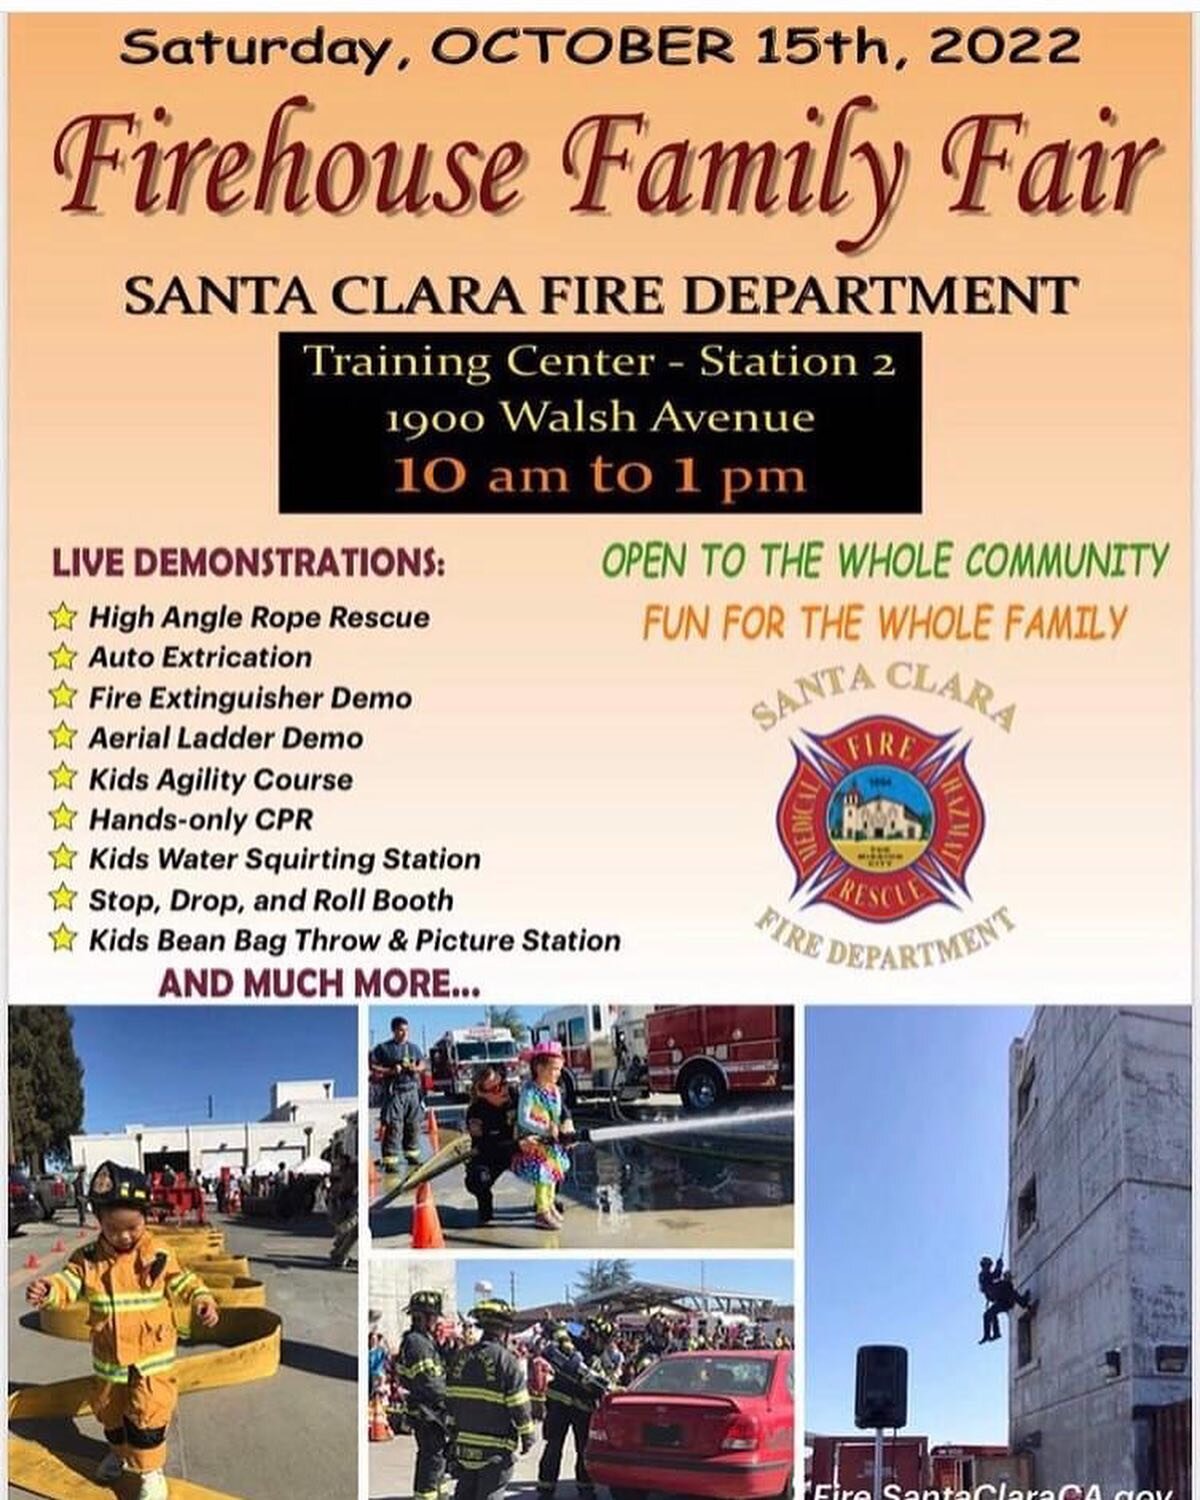 Come by the # Firehouse Family Fair tomorrow from 10am-2pm and learn about fire safety. All ages are welcome and the event is open to the community located at Santa Clara Fire Station 2! We will have a booth for The Firehouse Run registrations.